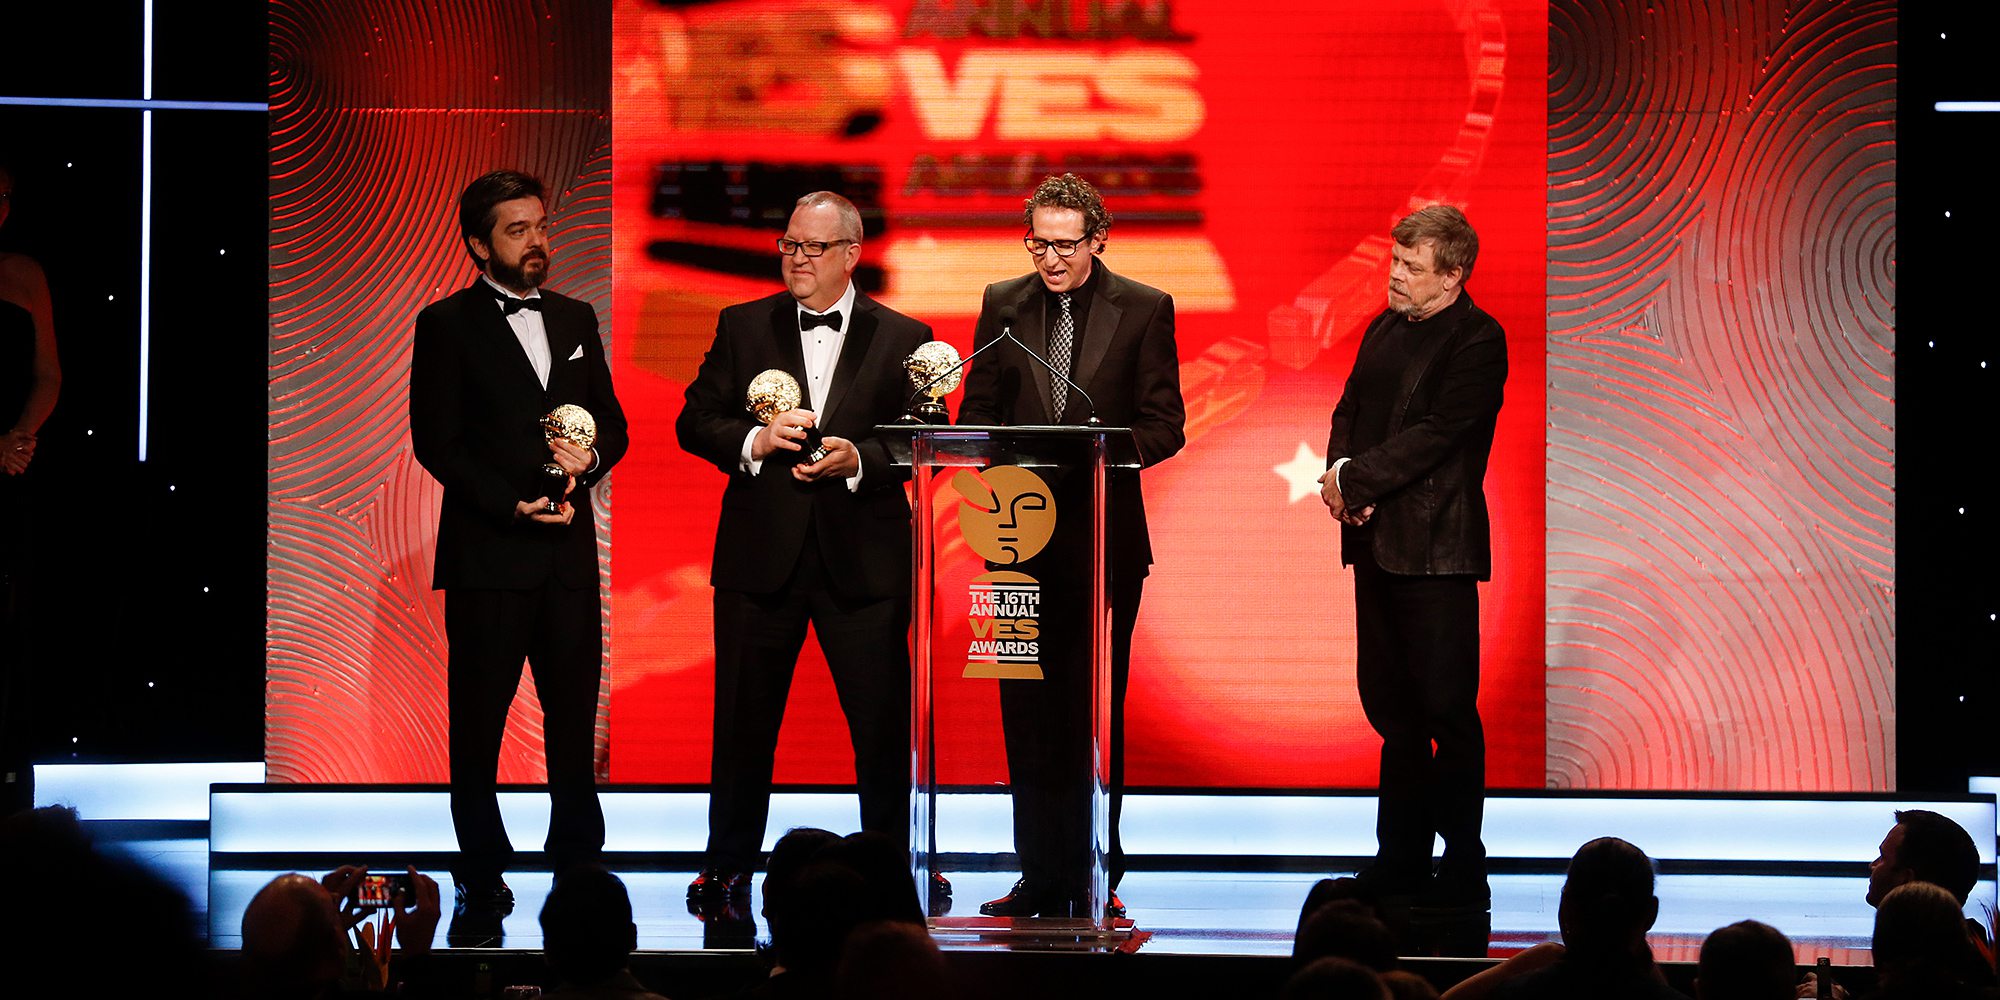 Bauer was recognized at the  Visual Effects Society Awards in 2018 when Mark Hamill (Luke Skywalker) was the presenter.